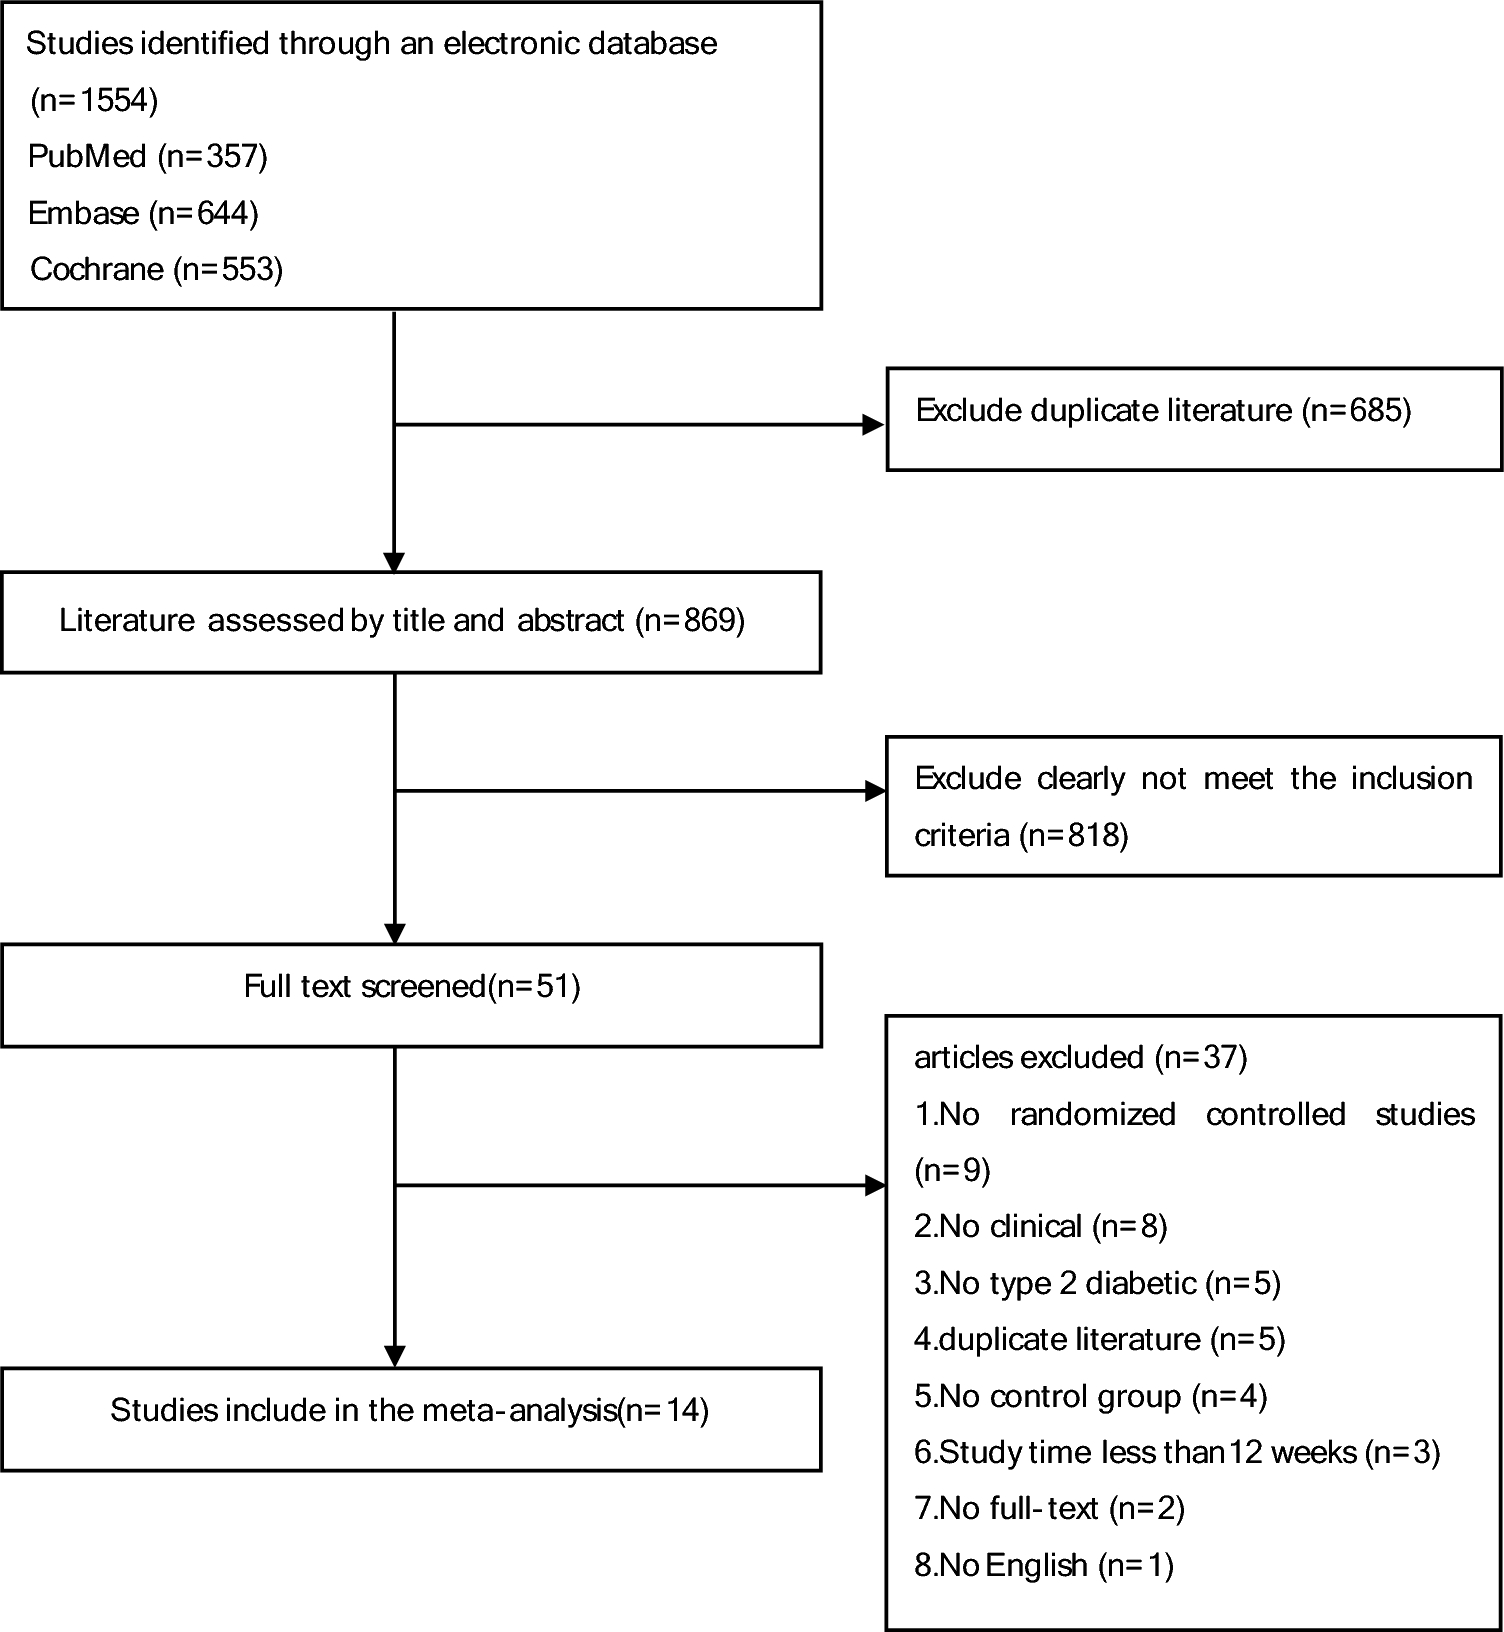 Renal, cardiovascular, and safety outcomes of adding sodium–glucose cotransporter-2 inhibitors to insulin therapy in patients with type-2 diabetes: a meta-analysis